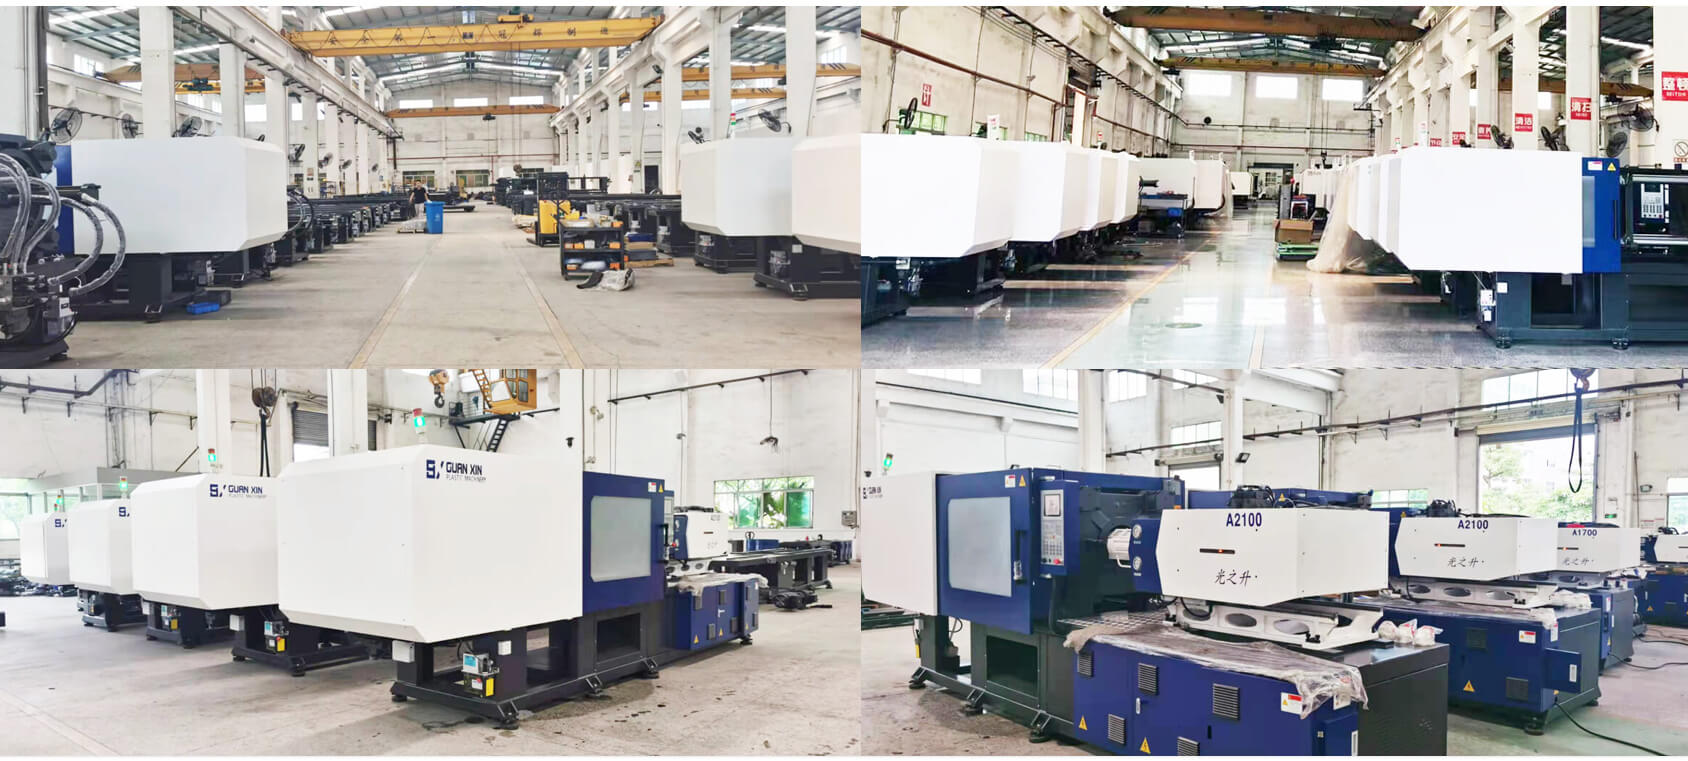 Professional Plastic injection blow molding machines manufacturer & supplier in China